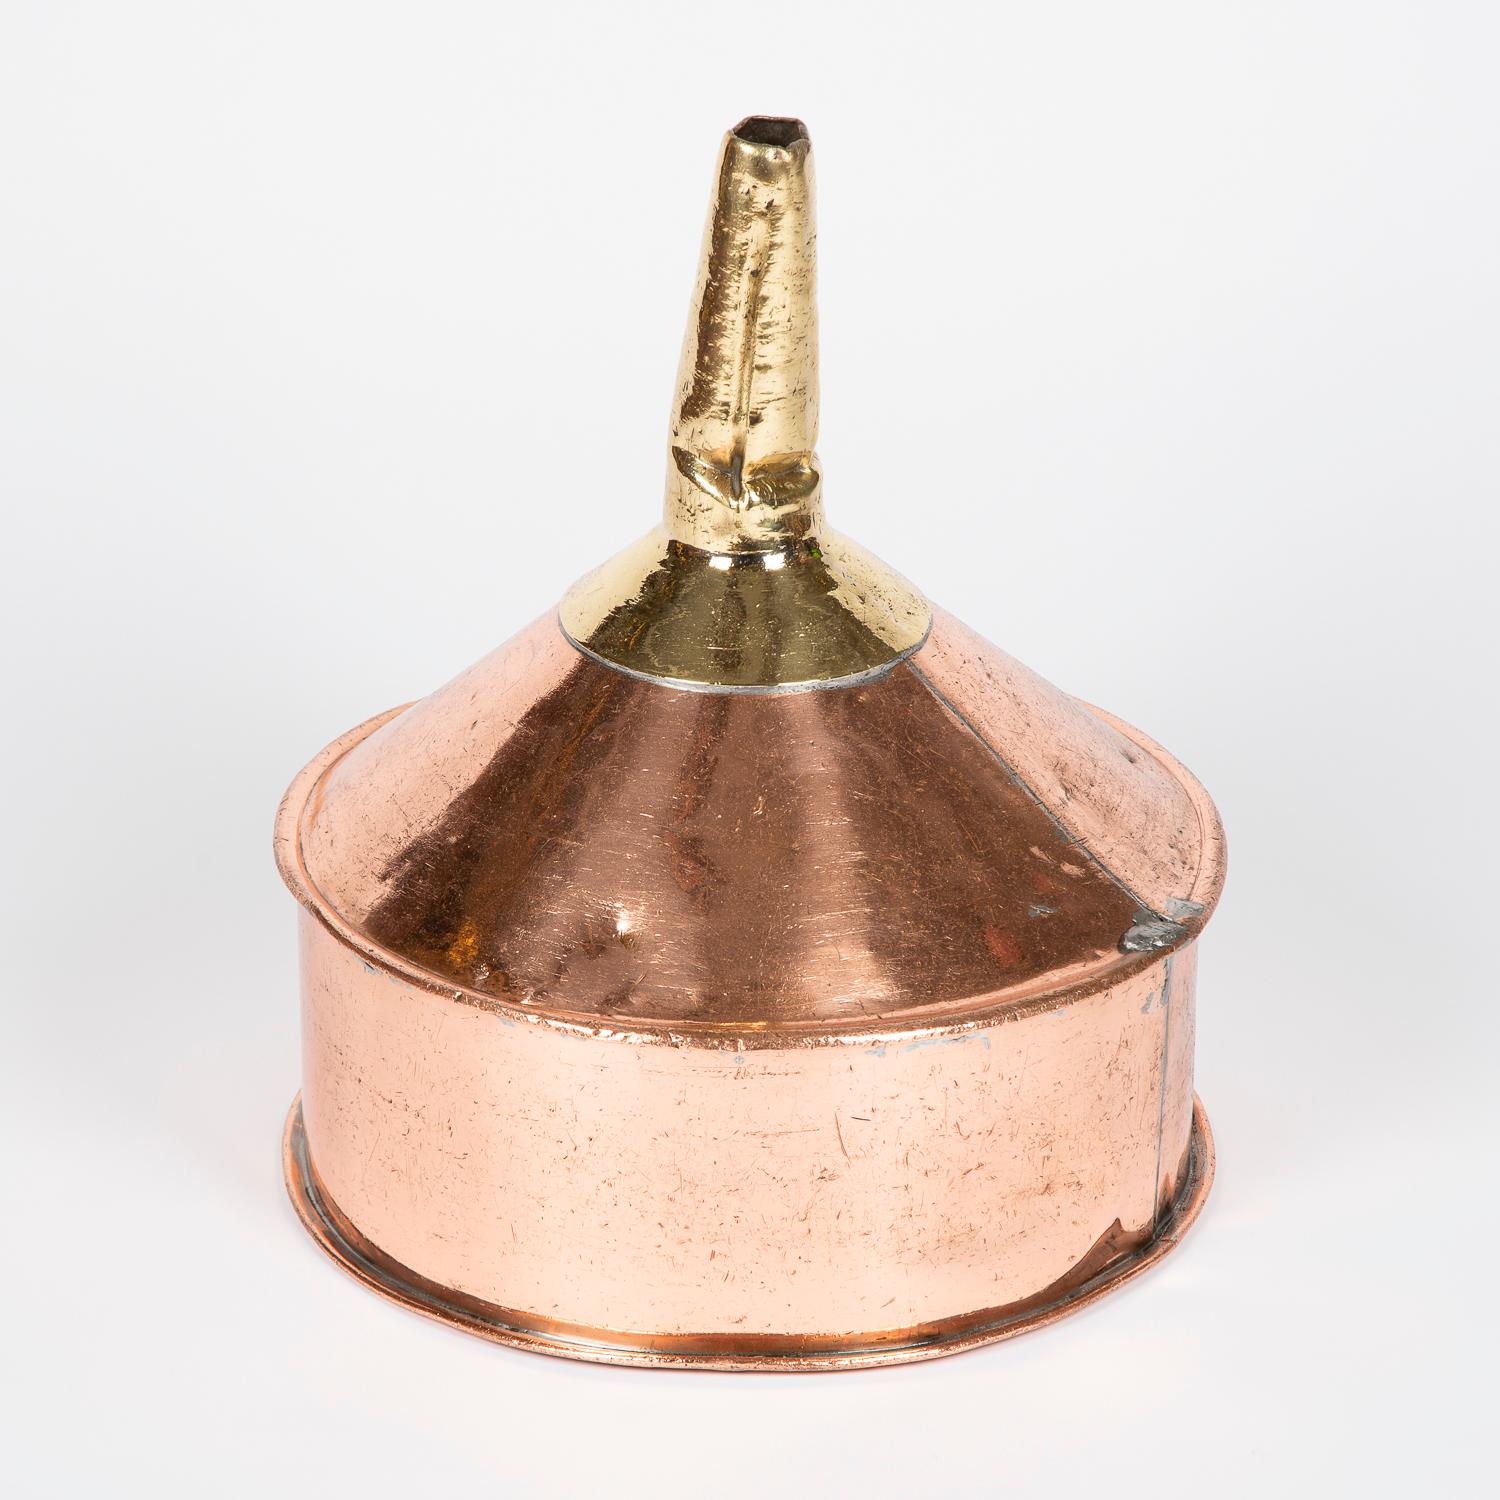 A large late 19th century copper and brass funnel.

From Wiltshire County, England.